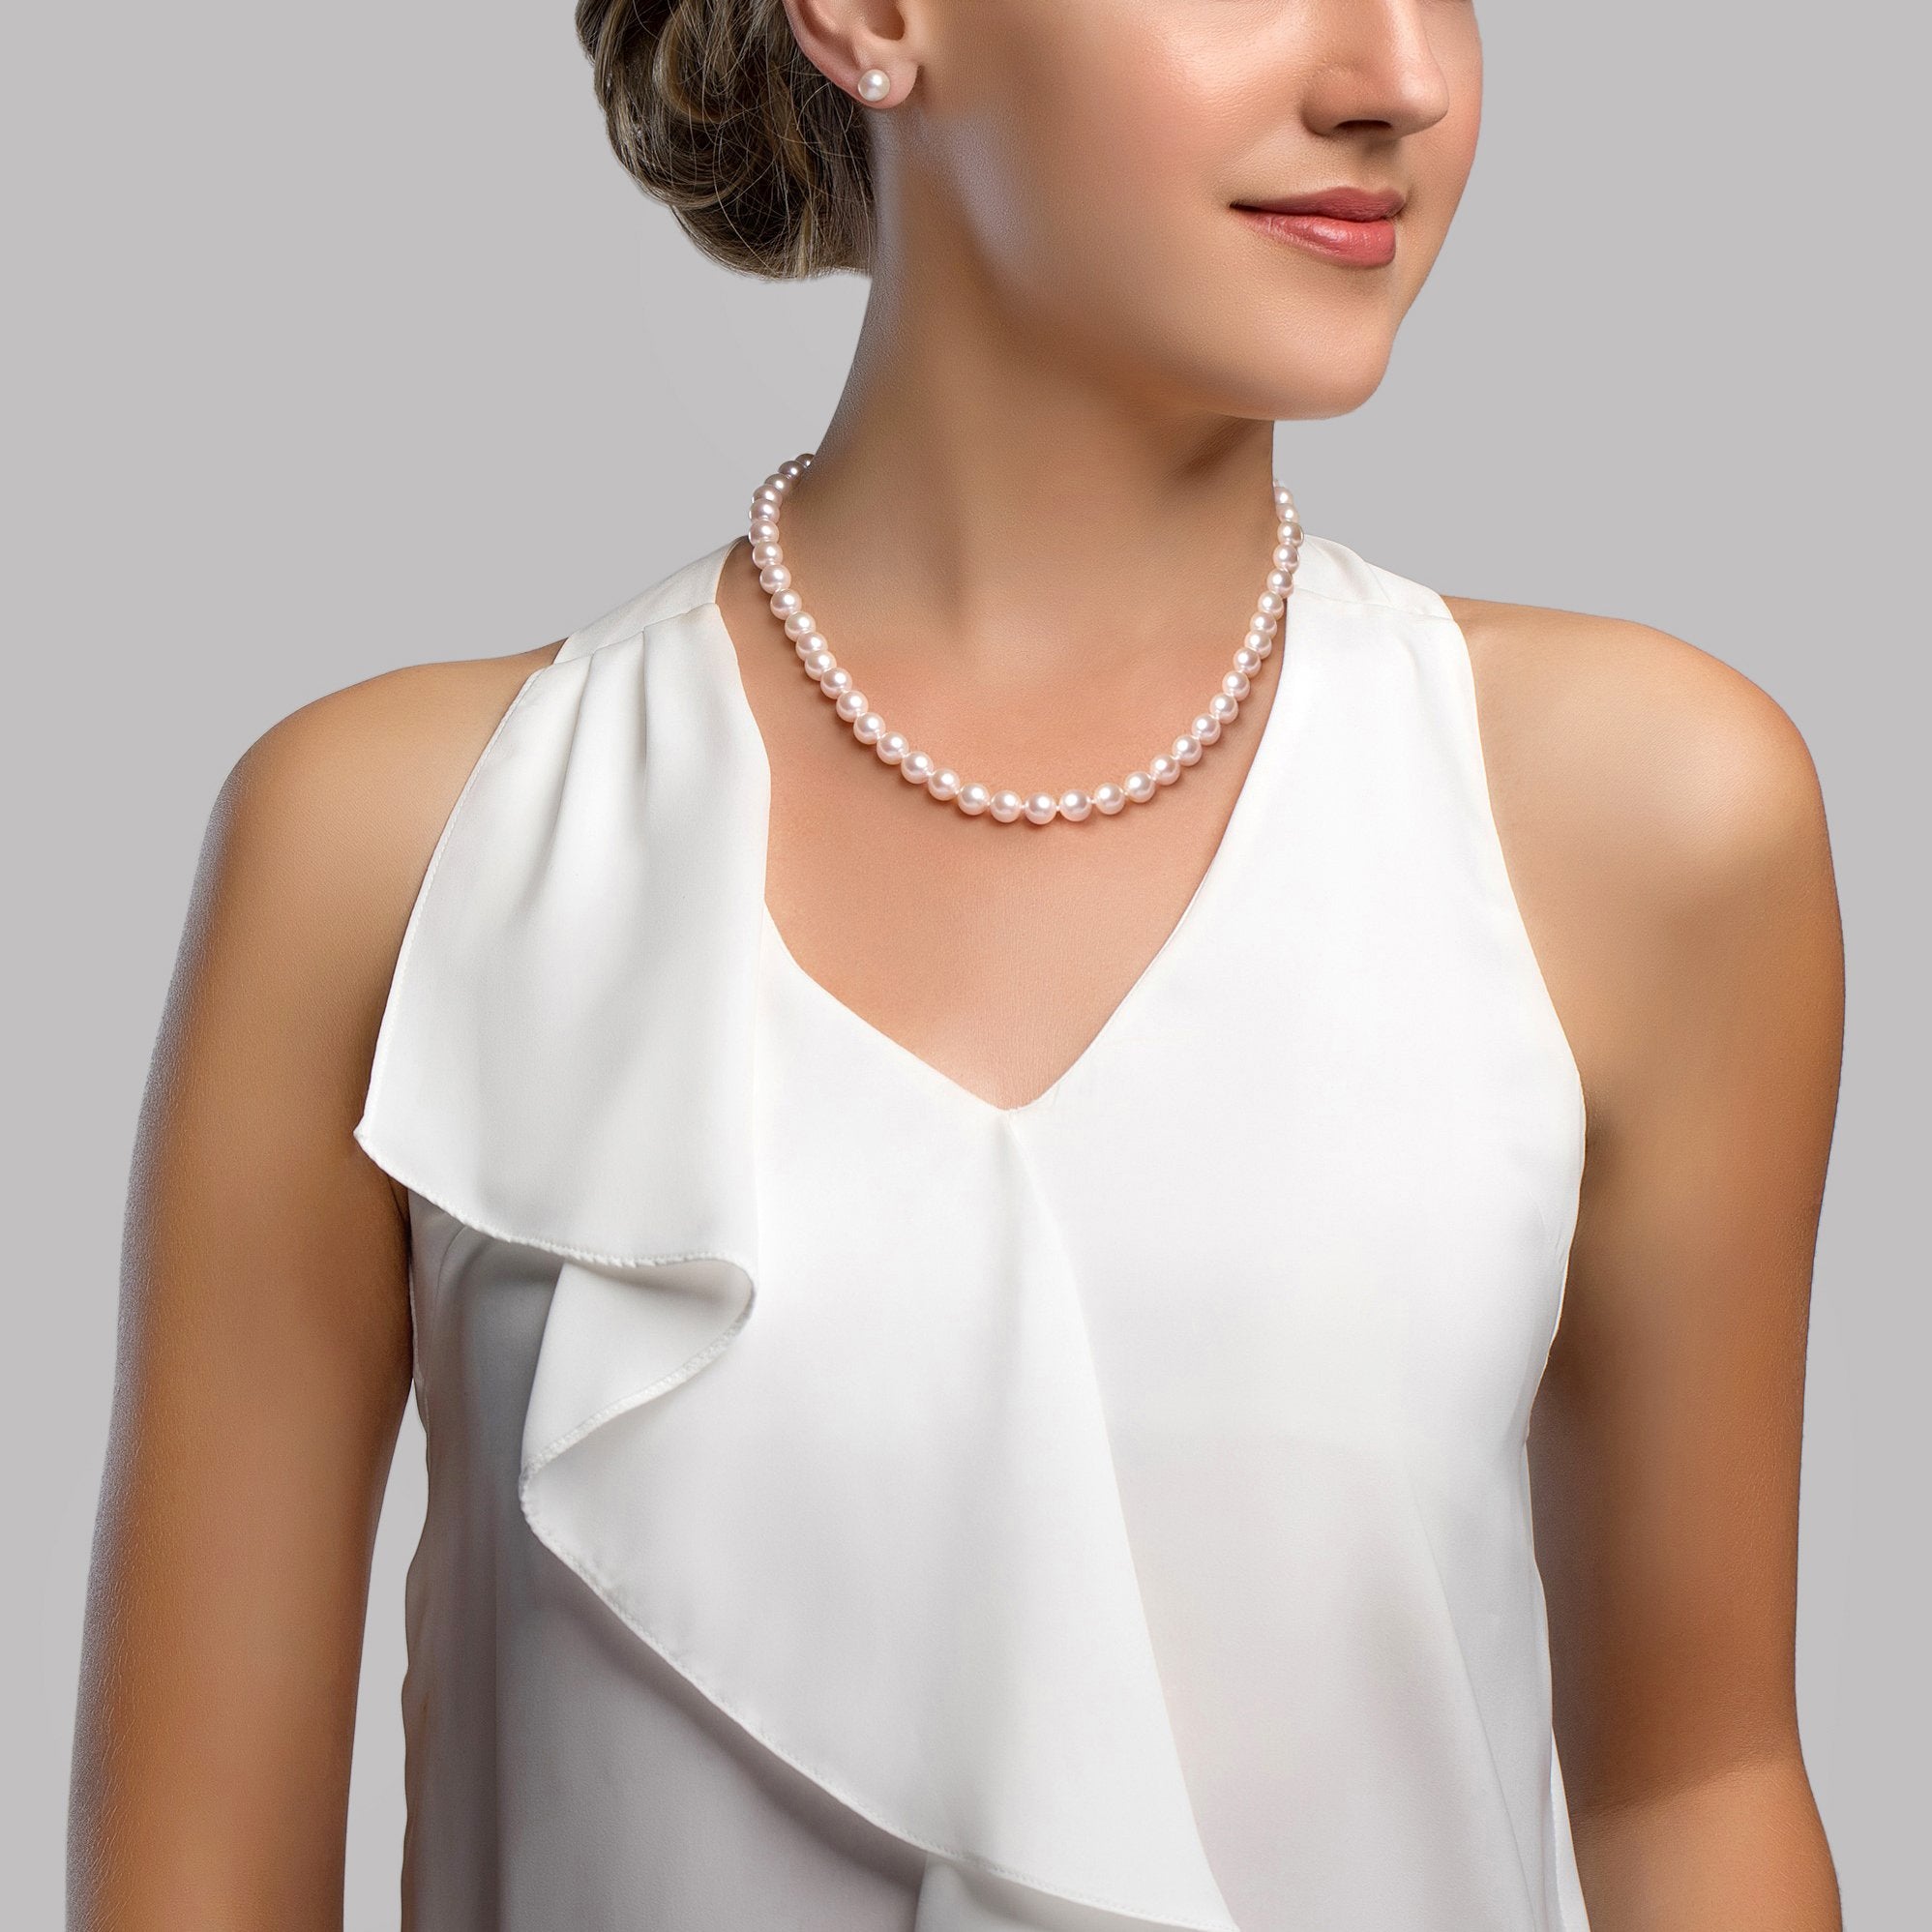 7.0-7.5mm White Freshwater Pearl Necklace